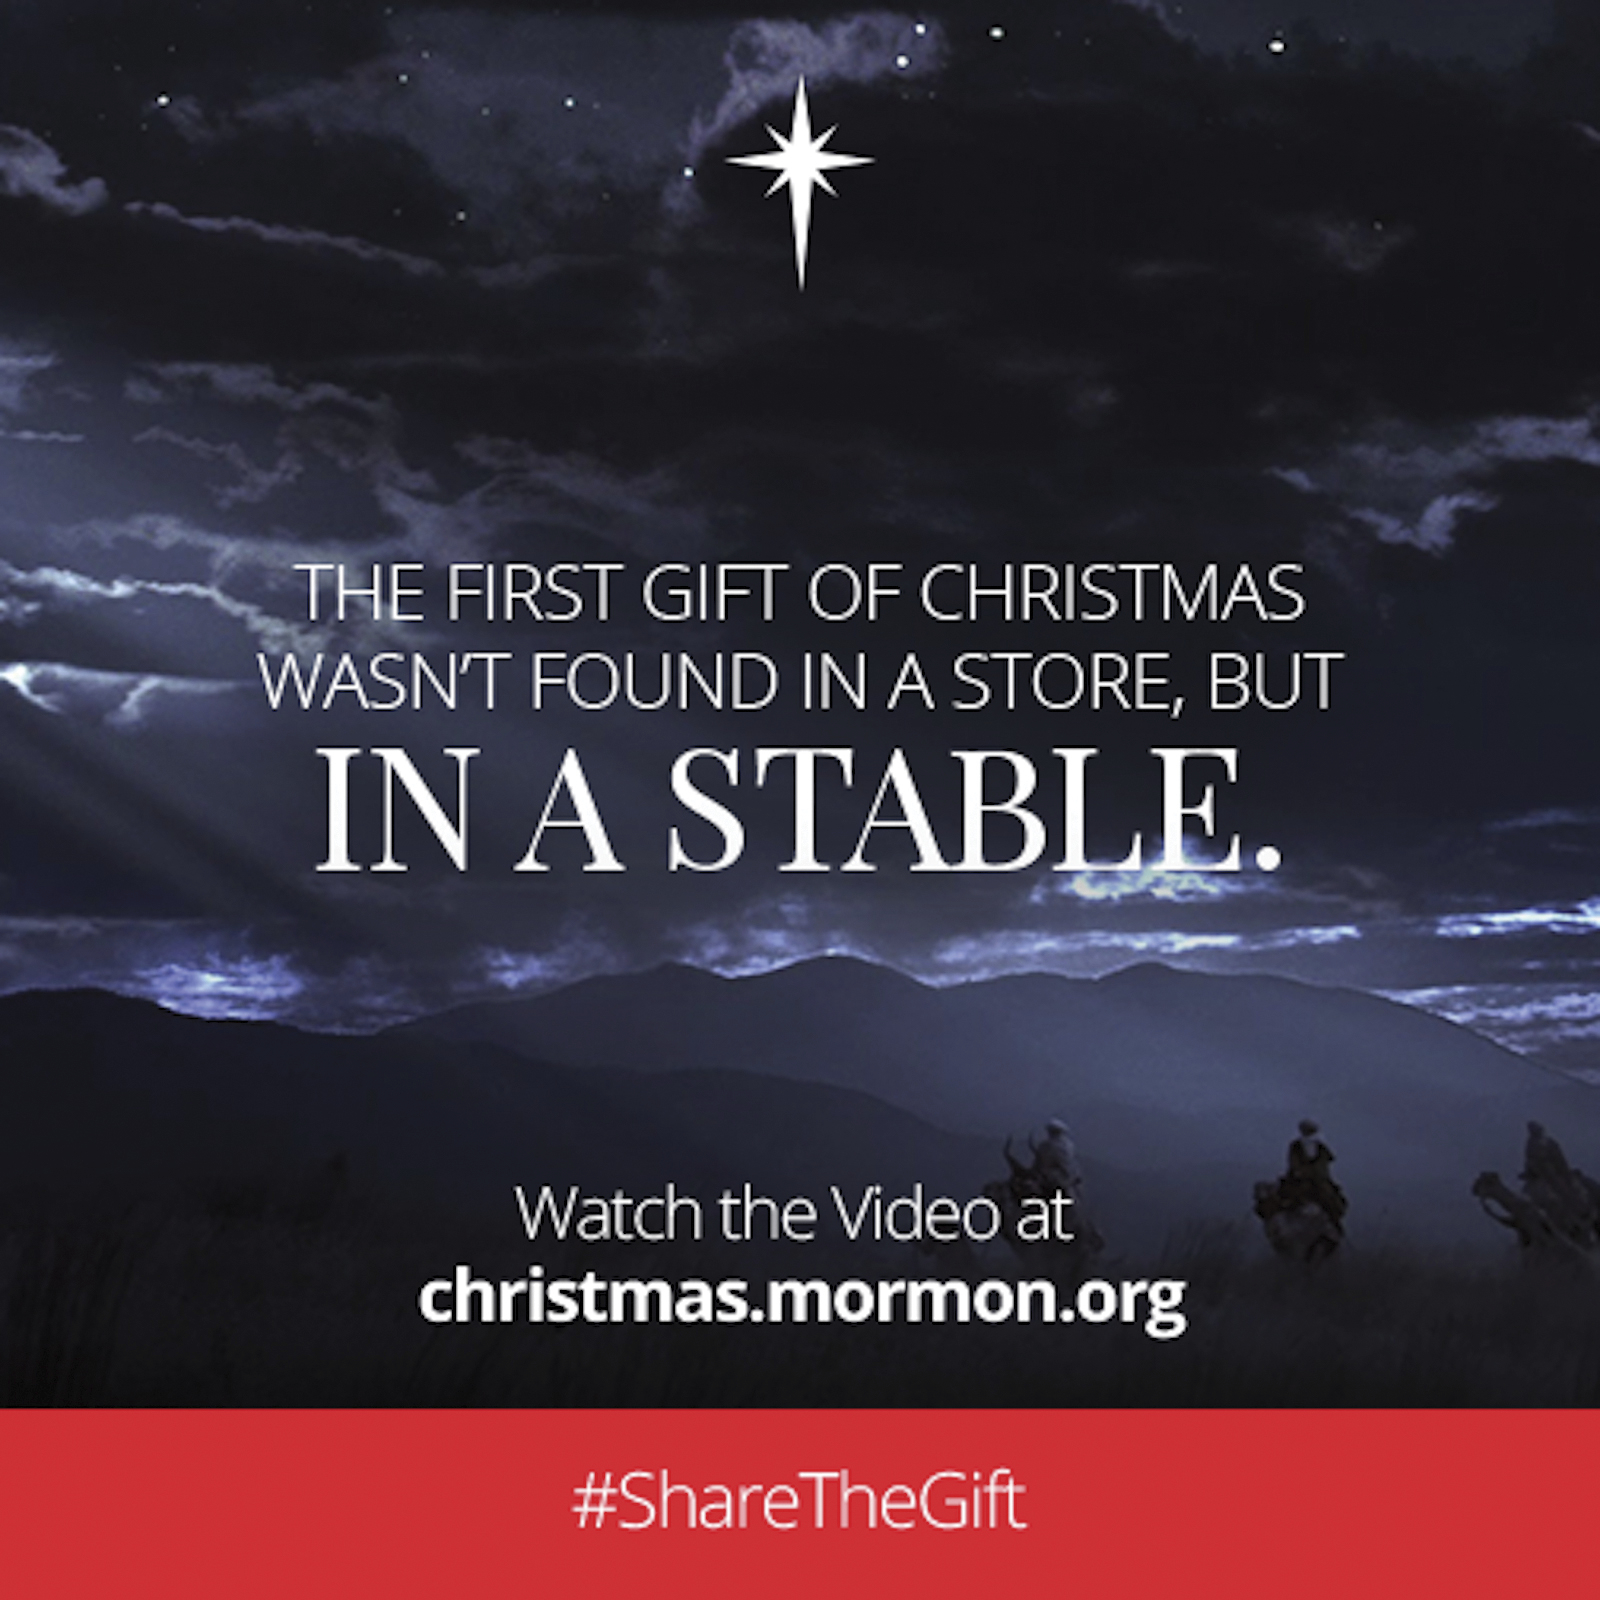 The first gift of Christmas wasn’t found in a store, but in a stable. Watch the video at christmas.mormon.org. #ShareTheGift